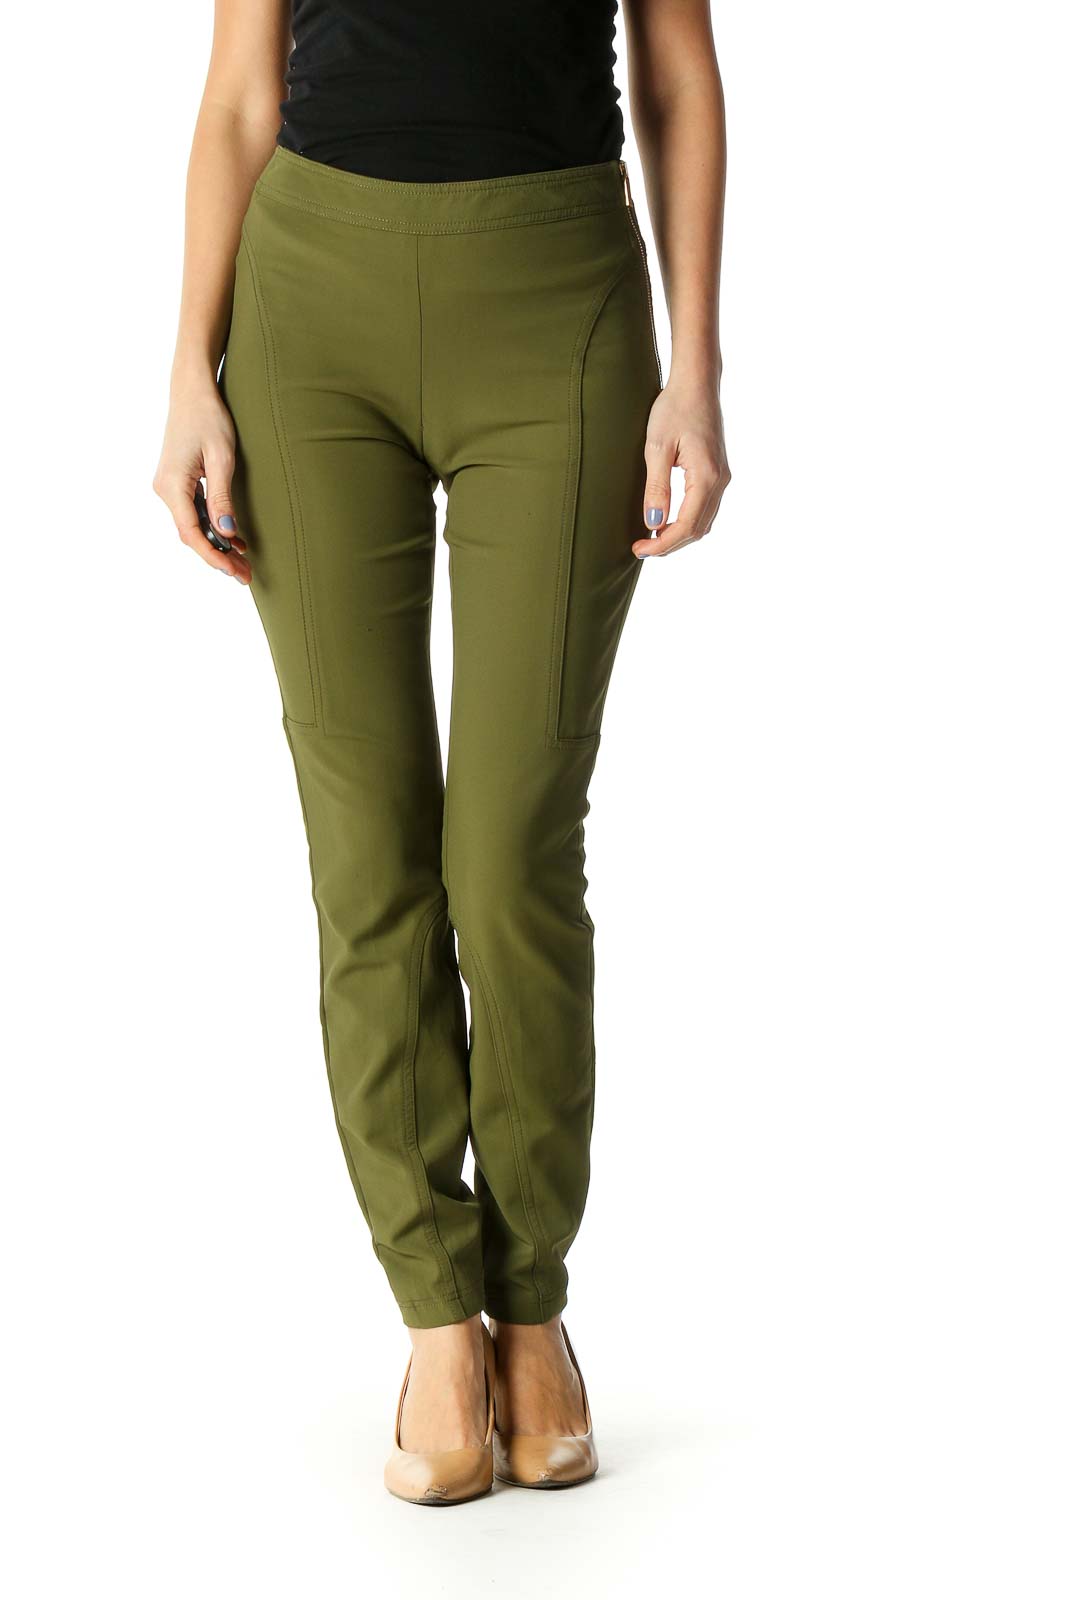 Green Solid Casual Trousers Front